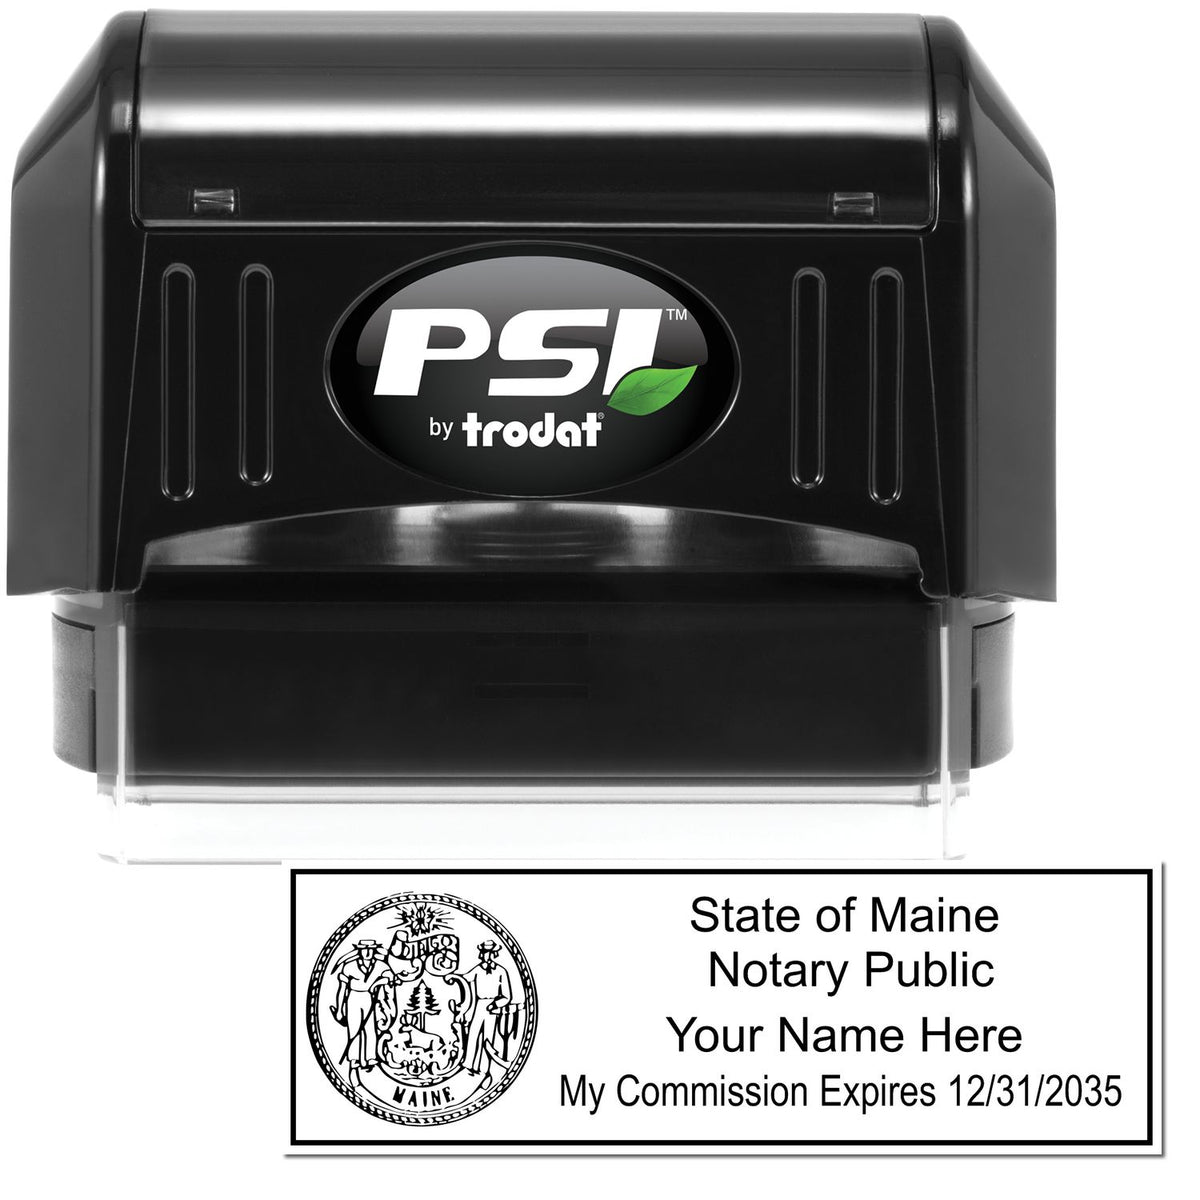 The main image for the PSI Maine Notary Stamp depicting a sample of the imprint and electronic files